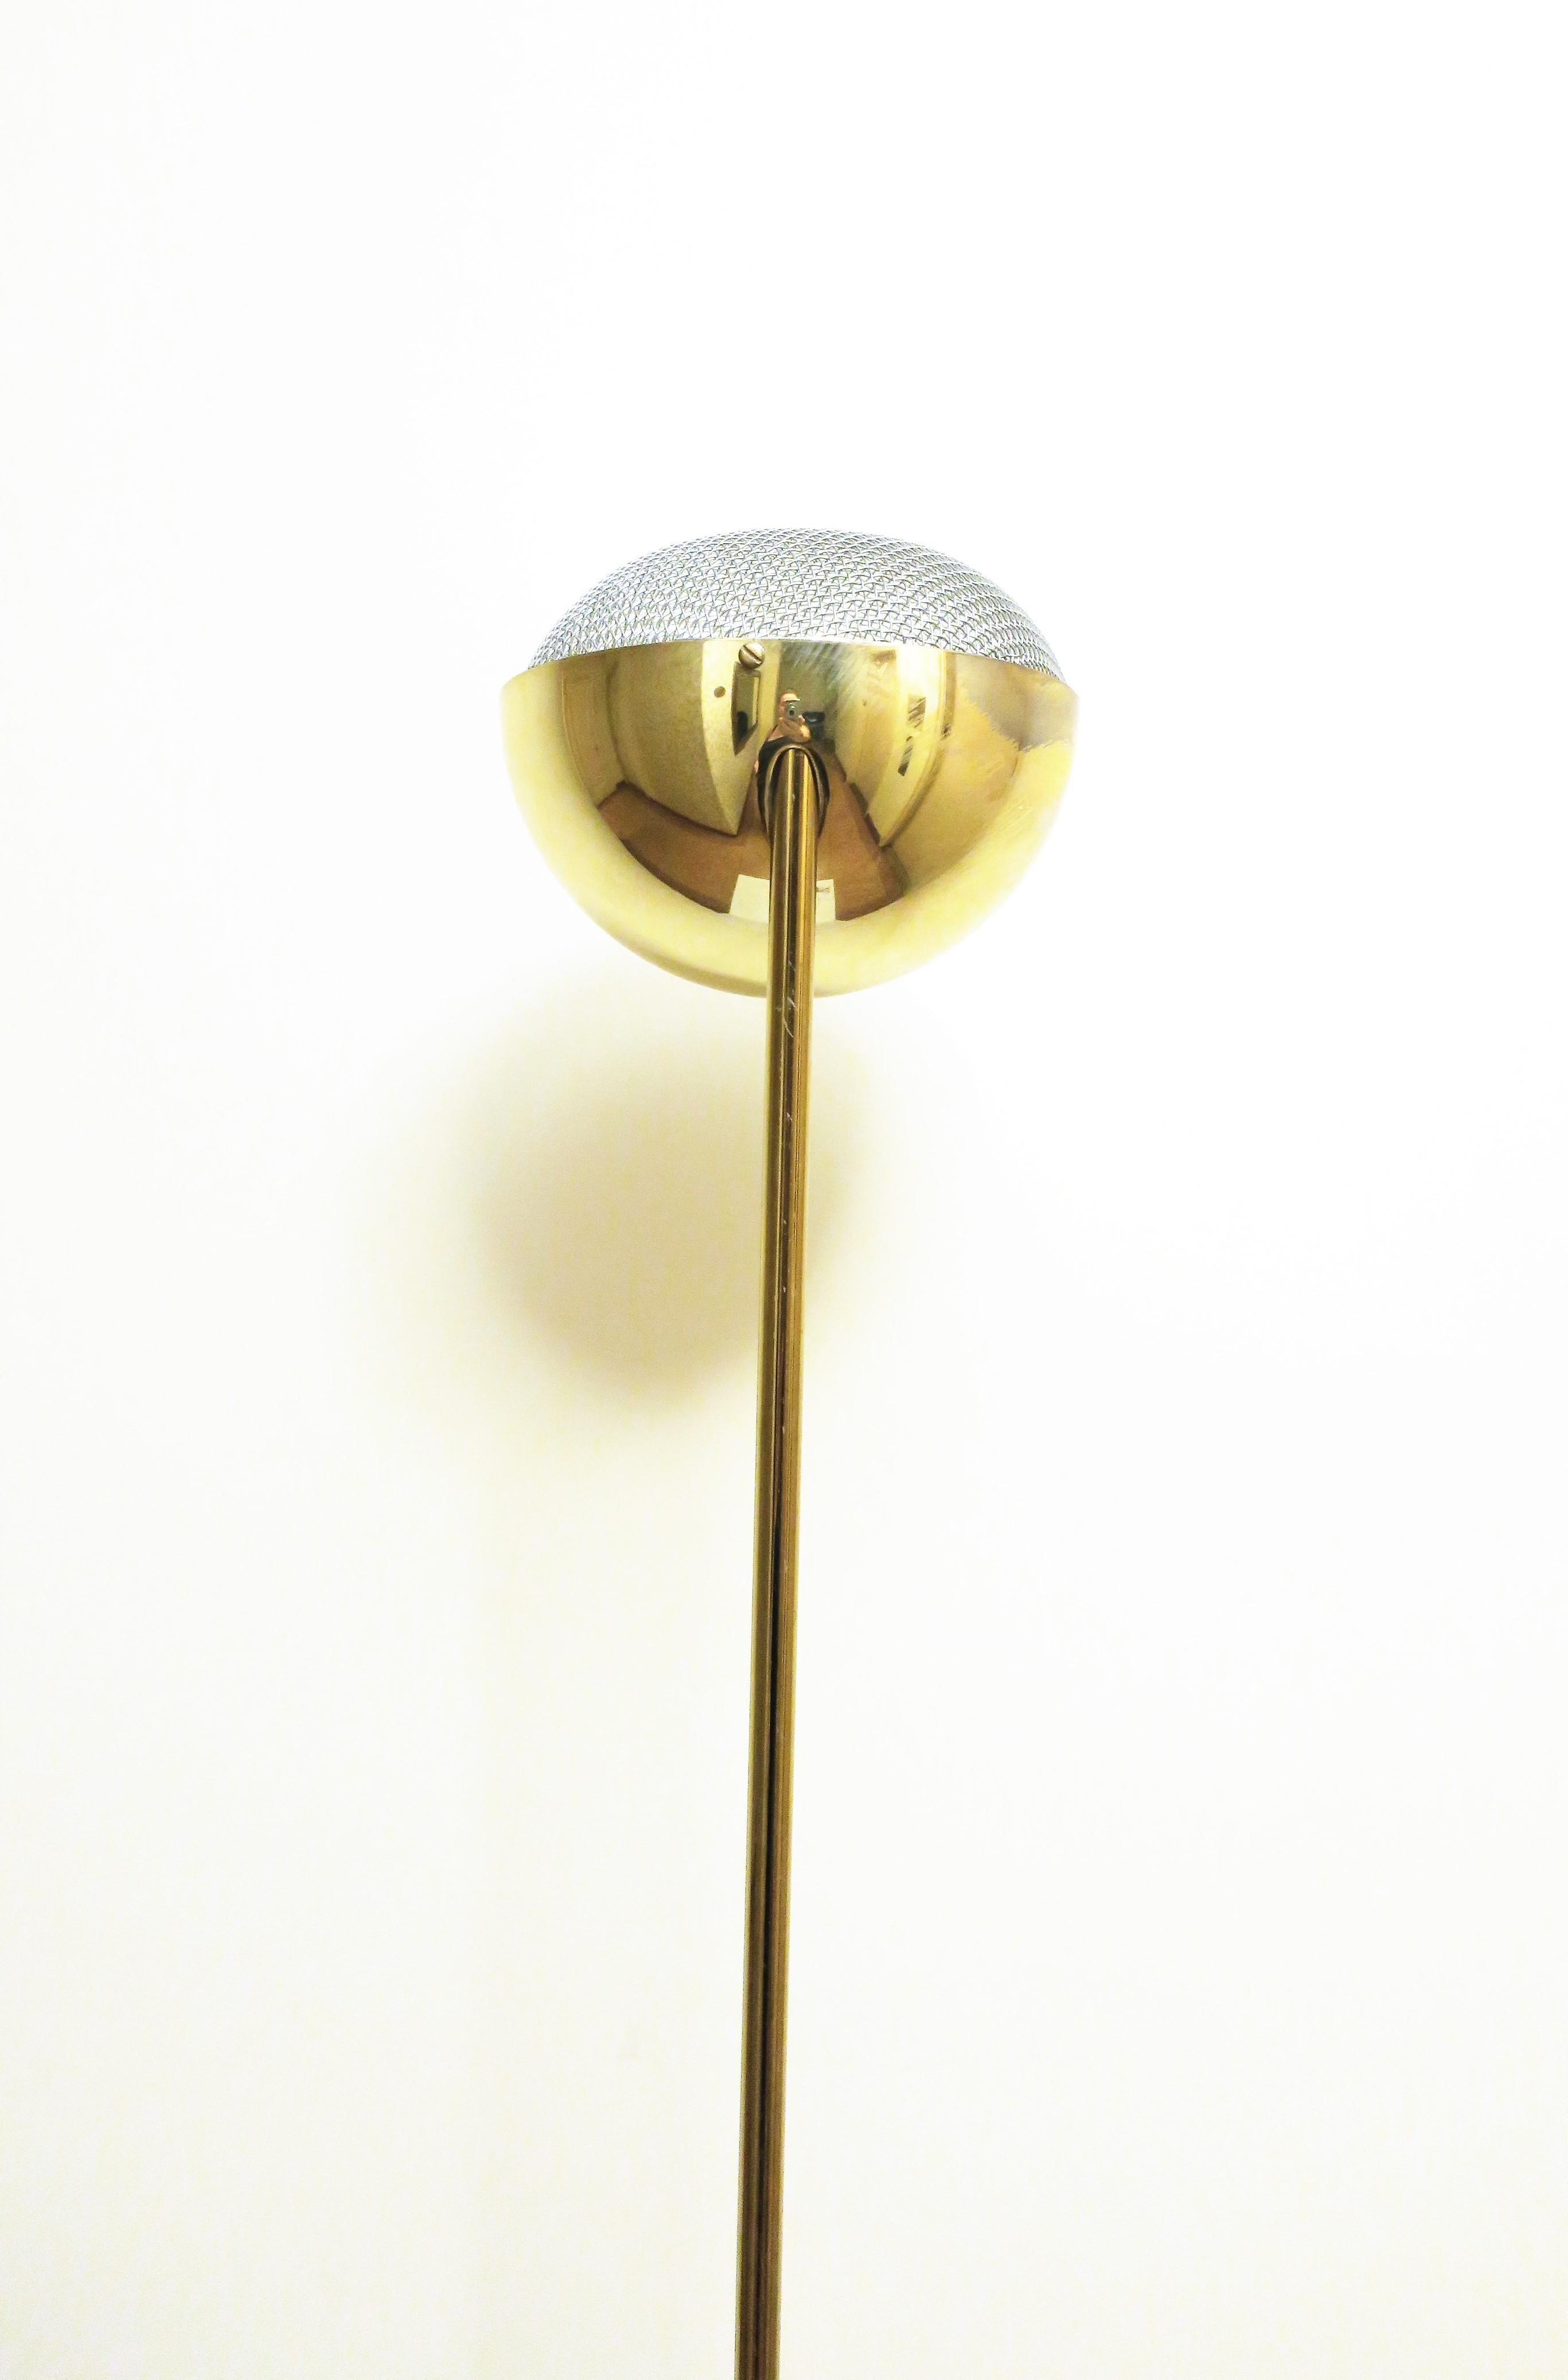 American Modern Brass Plated Floor Lamp, circa 1970s For Sale